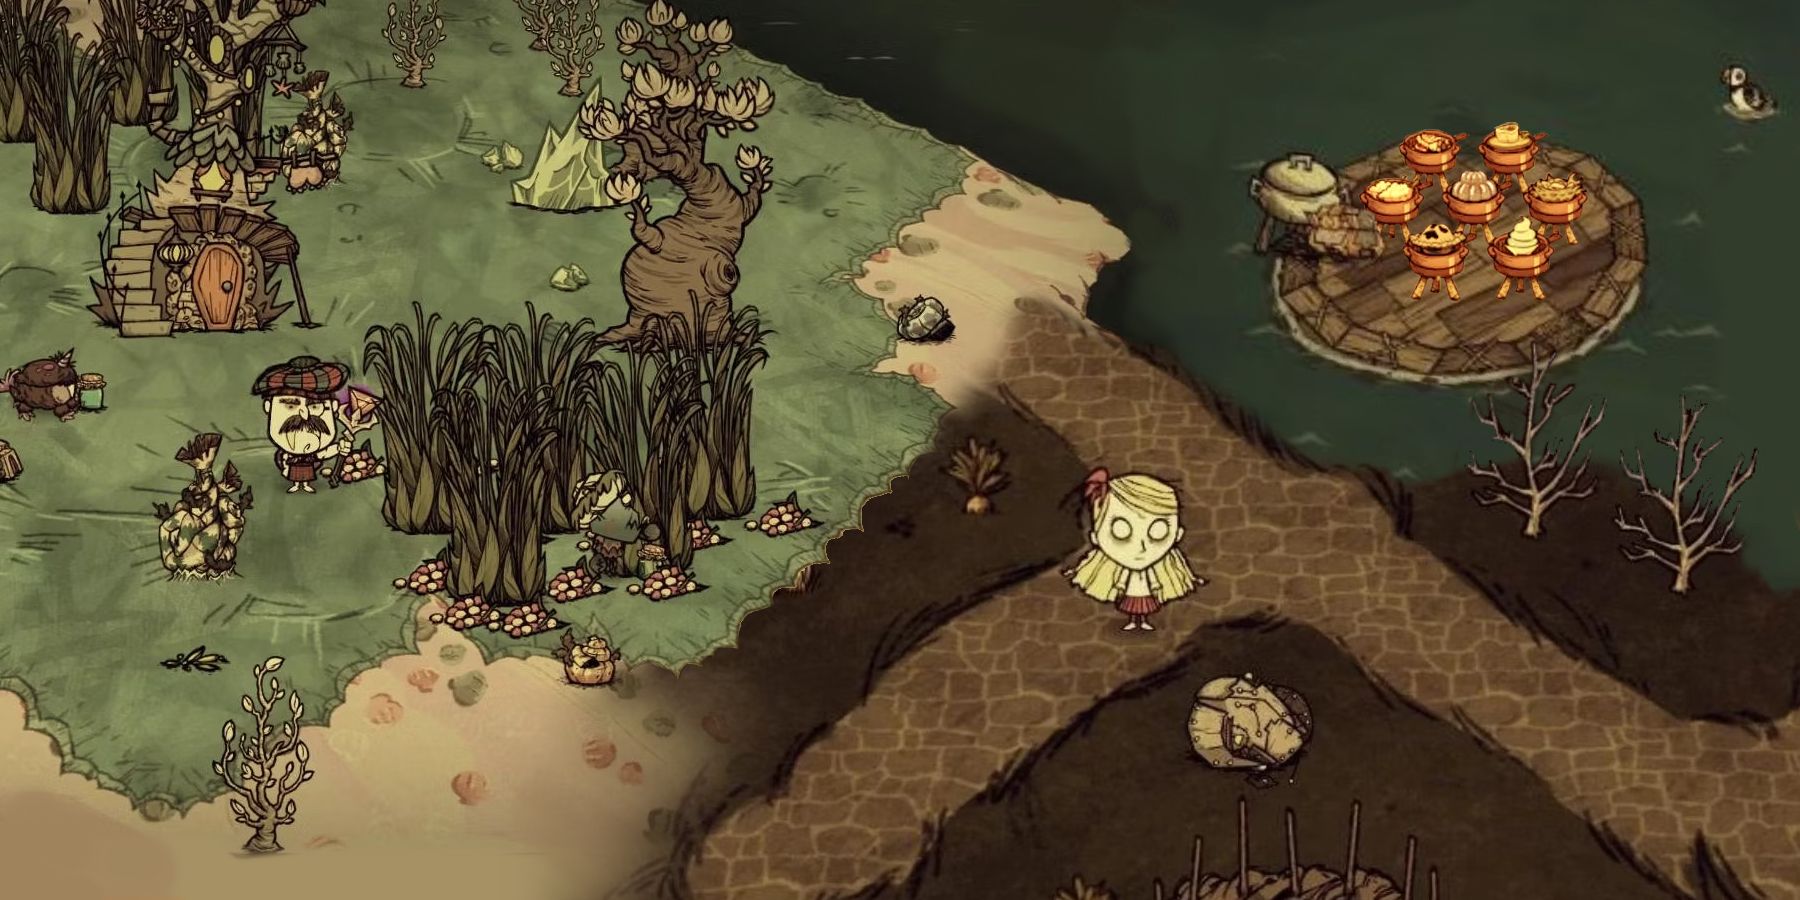 The Best food sources that can be found in Don't Starve Together